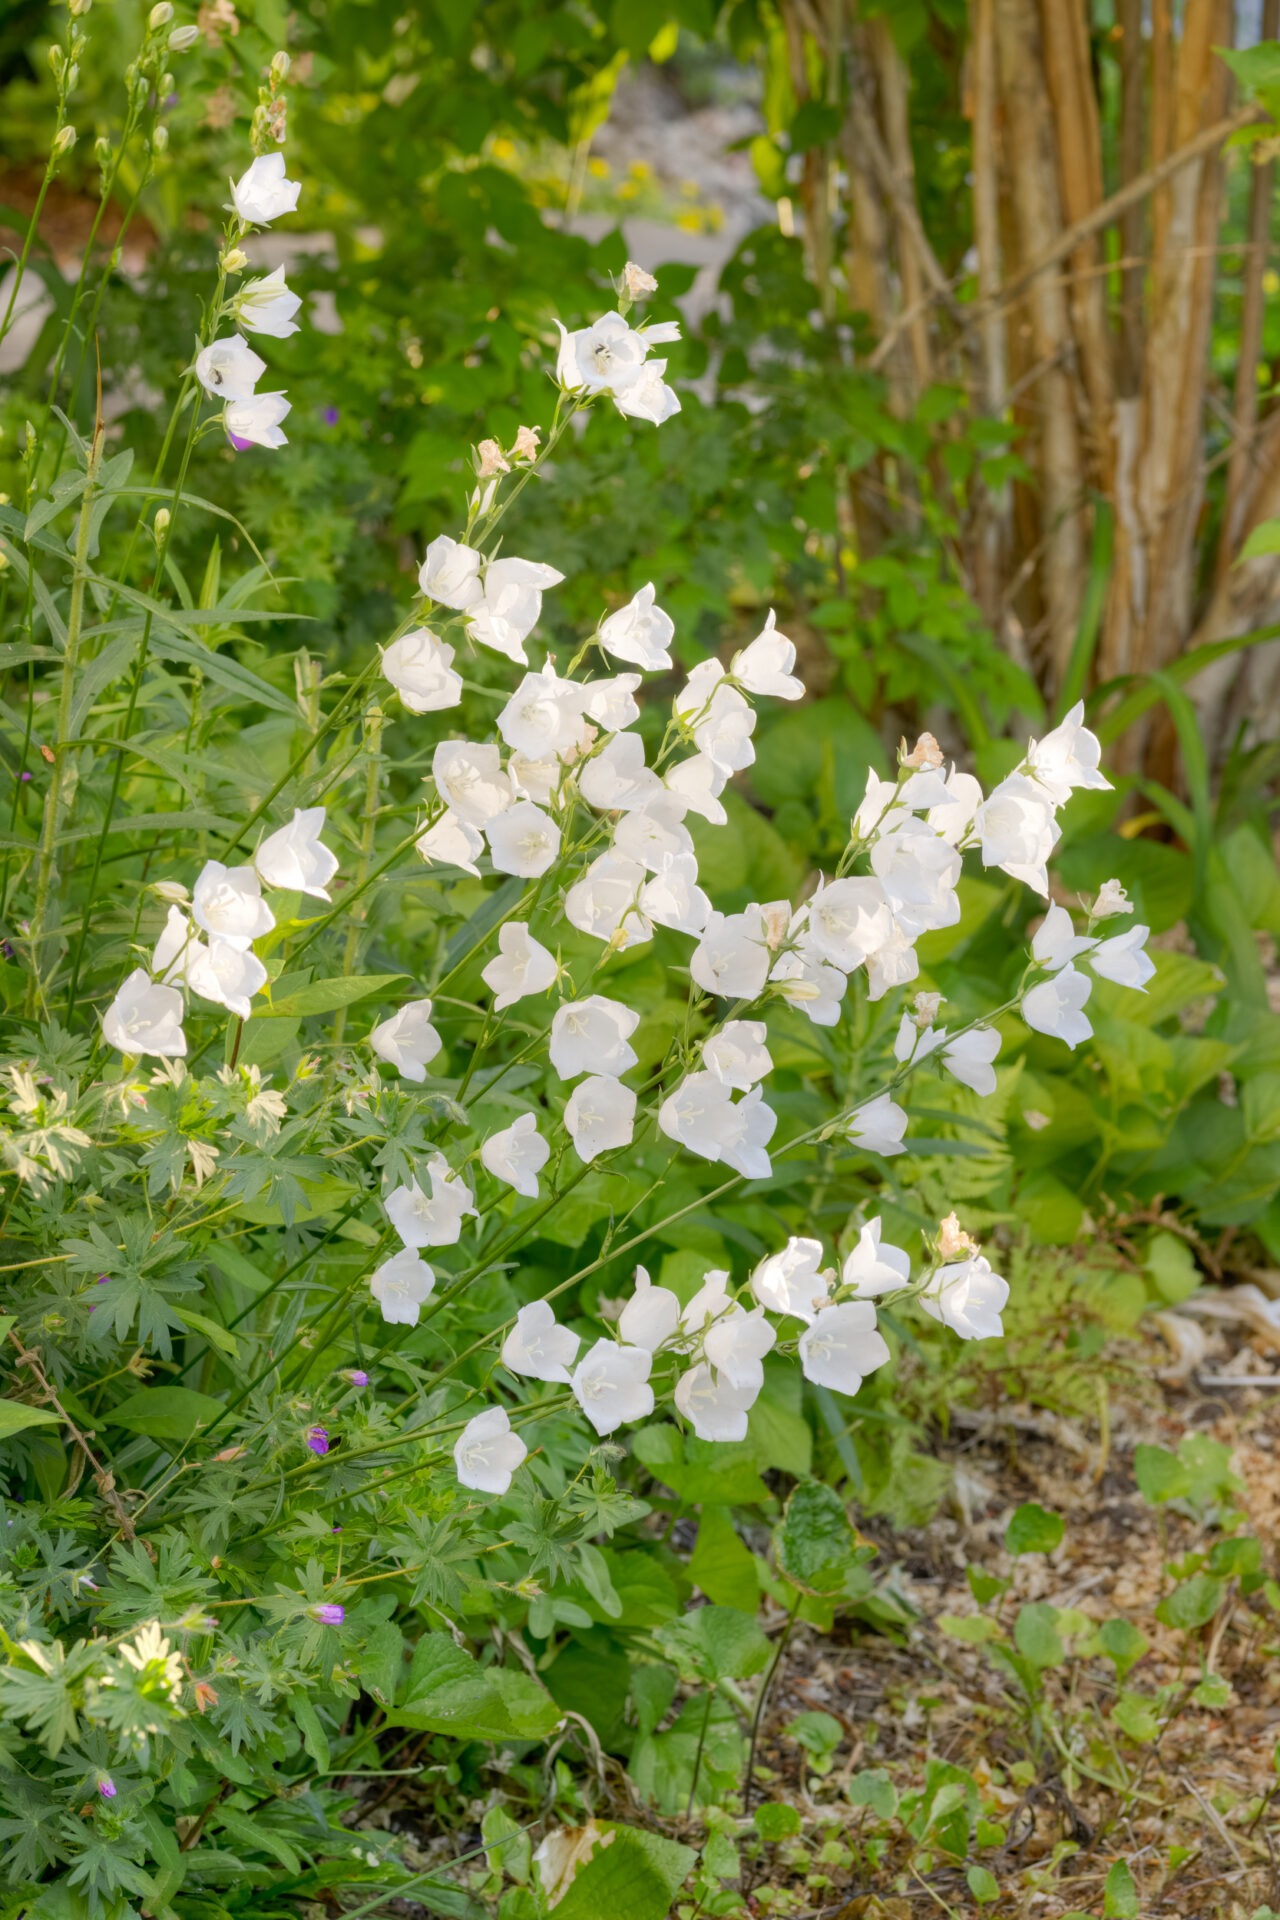 A cluster of delicate white bell-shaped flowers blooms among green foliage in a garden setting, with a blur of woody stems in the background.